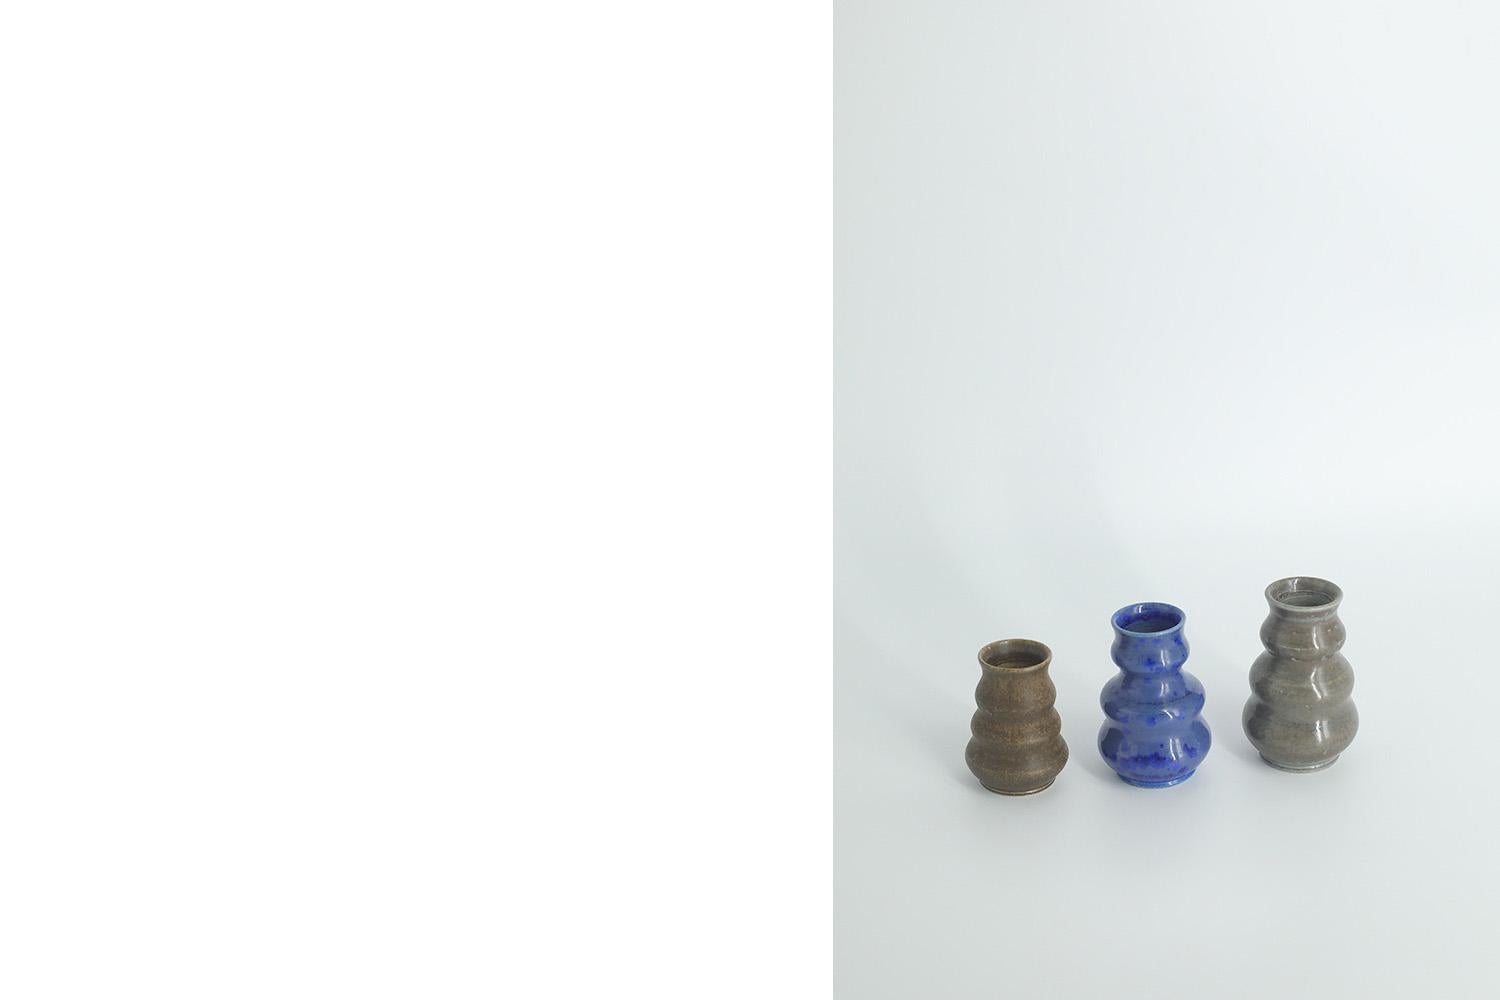 1. Height 8 cm  Width 5 cm  Depth 5 cm
2. Height 7.5 cm  Width 5 cm  Depth 5 cm
3. Height 6 cm  Width 5 cm  Depth 5 cm

This set of 3 miniature vases was designed by Gunnar Borg for the Swedish manufacture Höganäs Keramik during the 1960s. Handmade